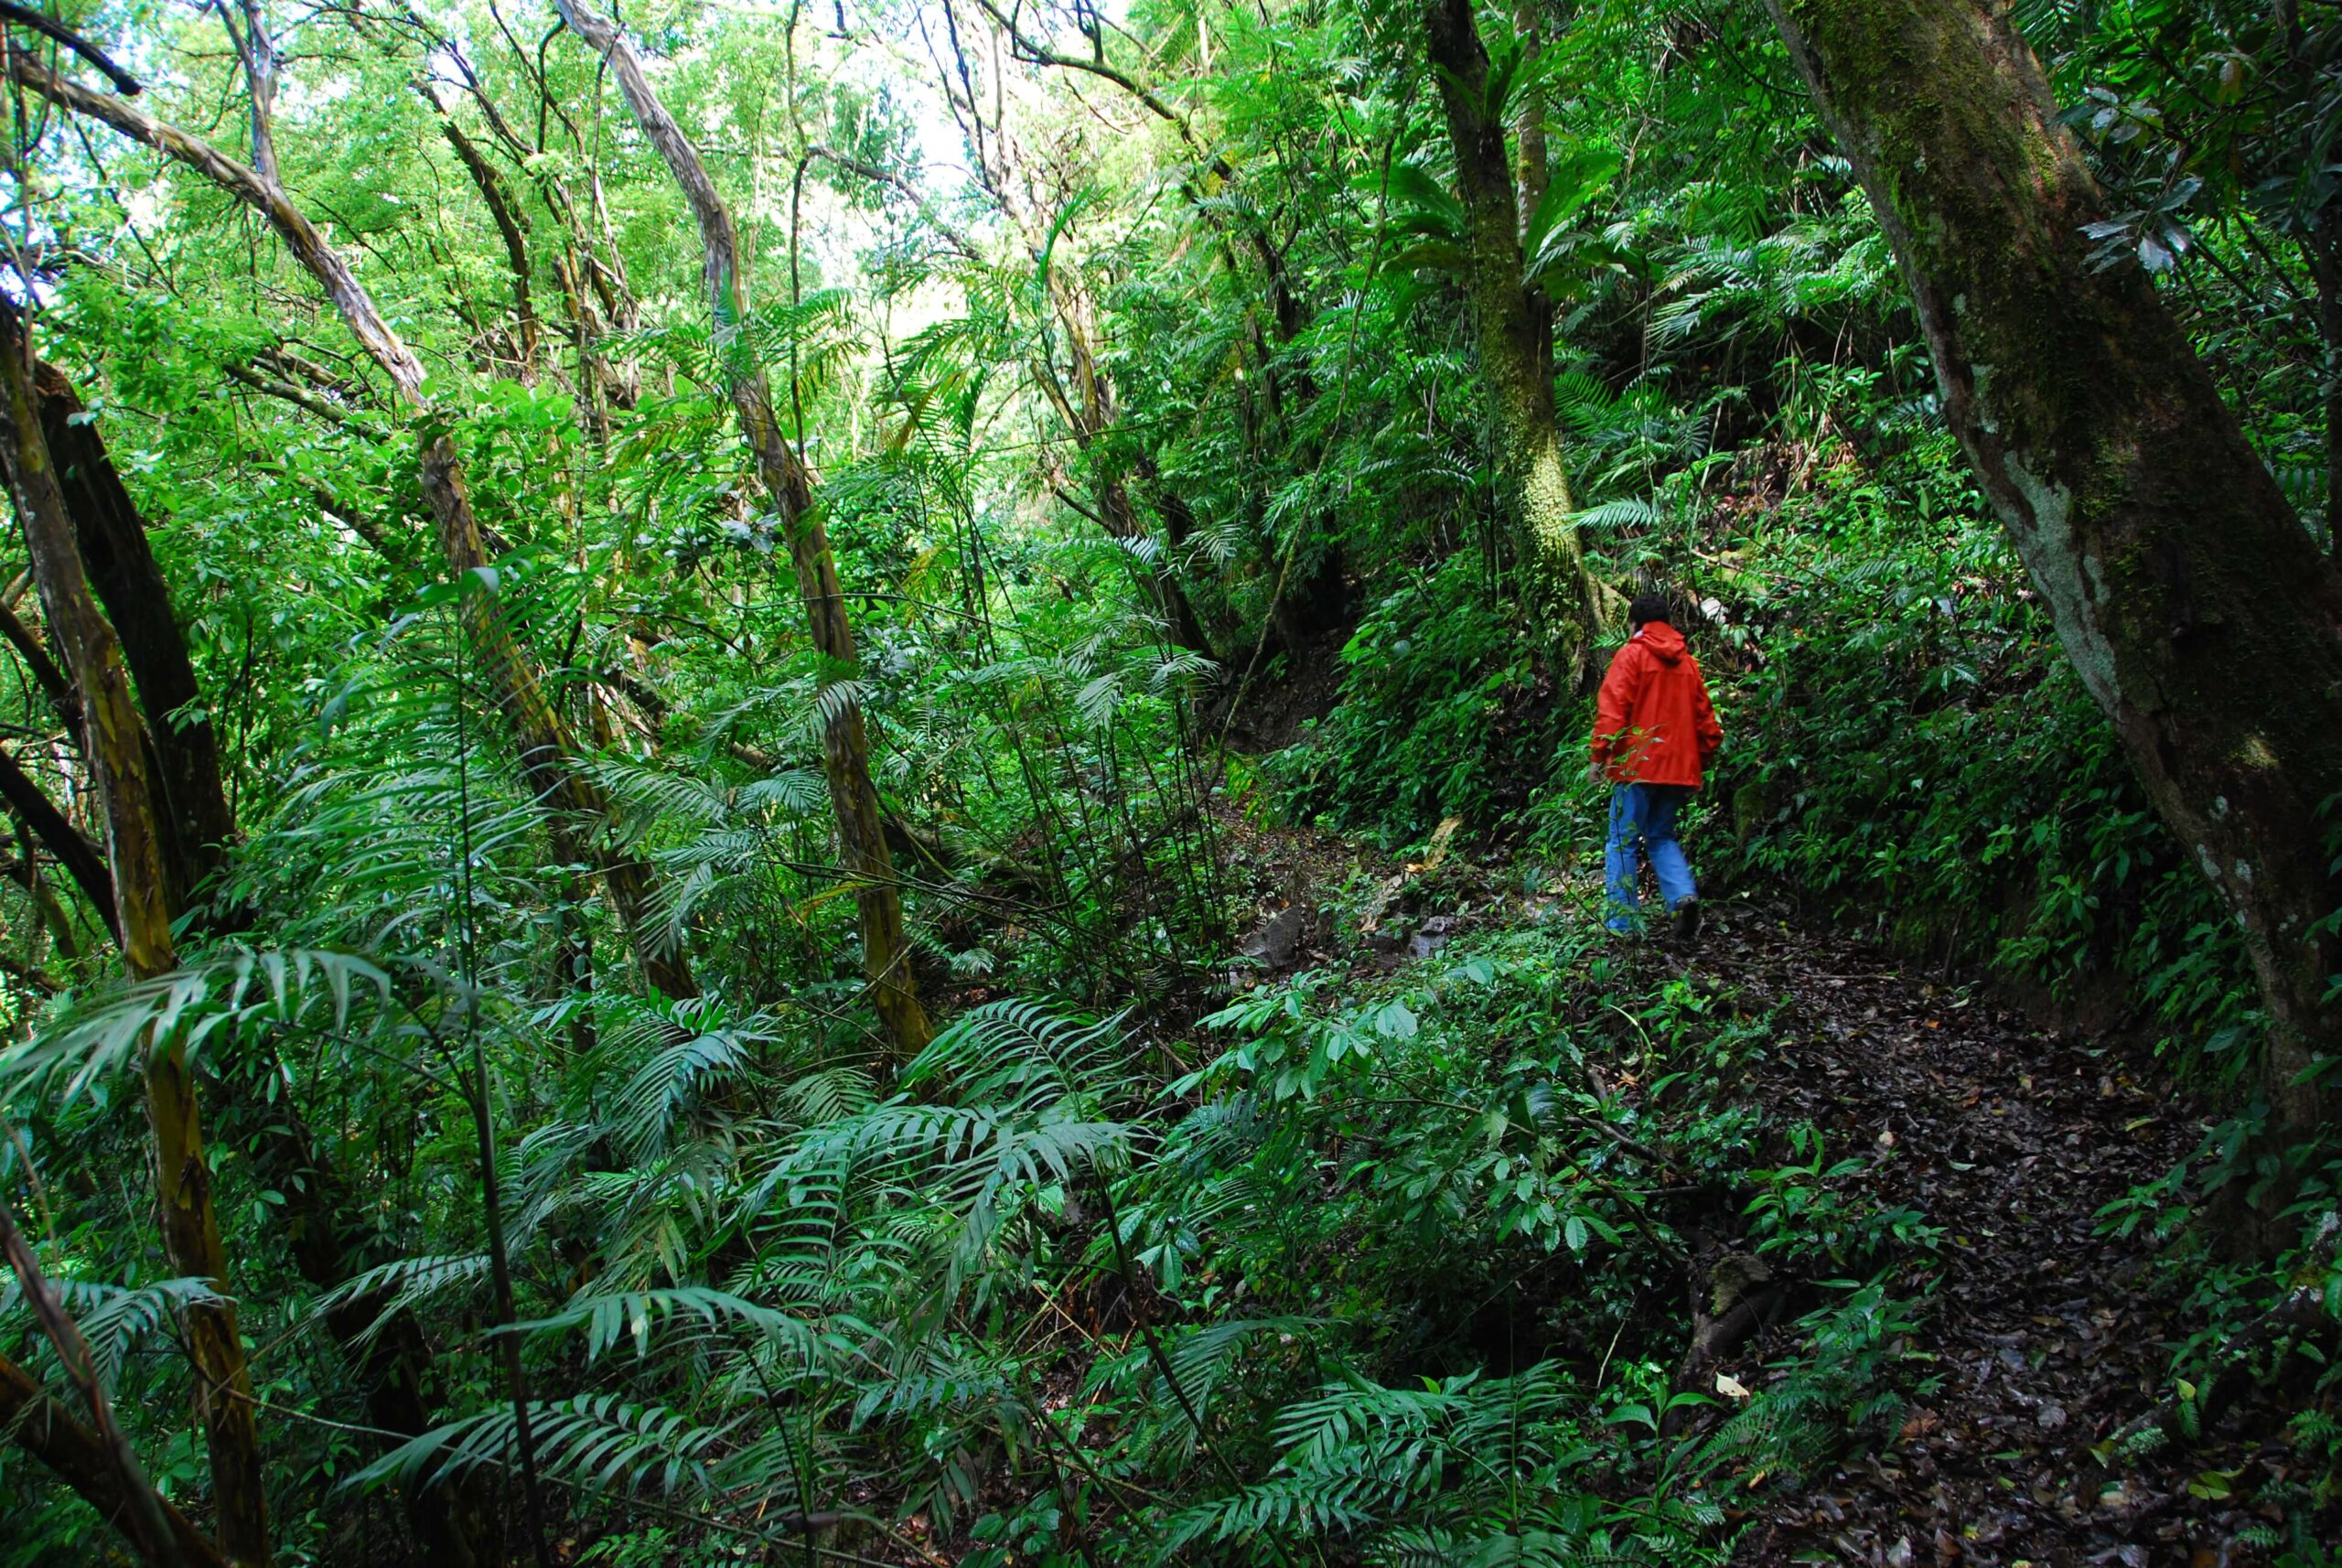 Enjoy the serene surroundings and immerse yourself in the natural beauty of the cloud forest!